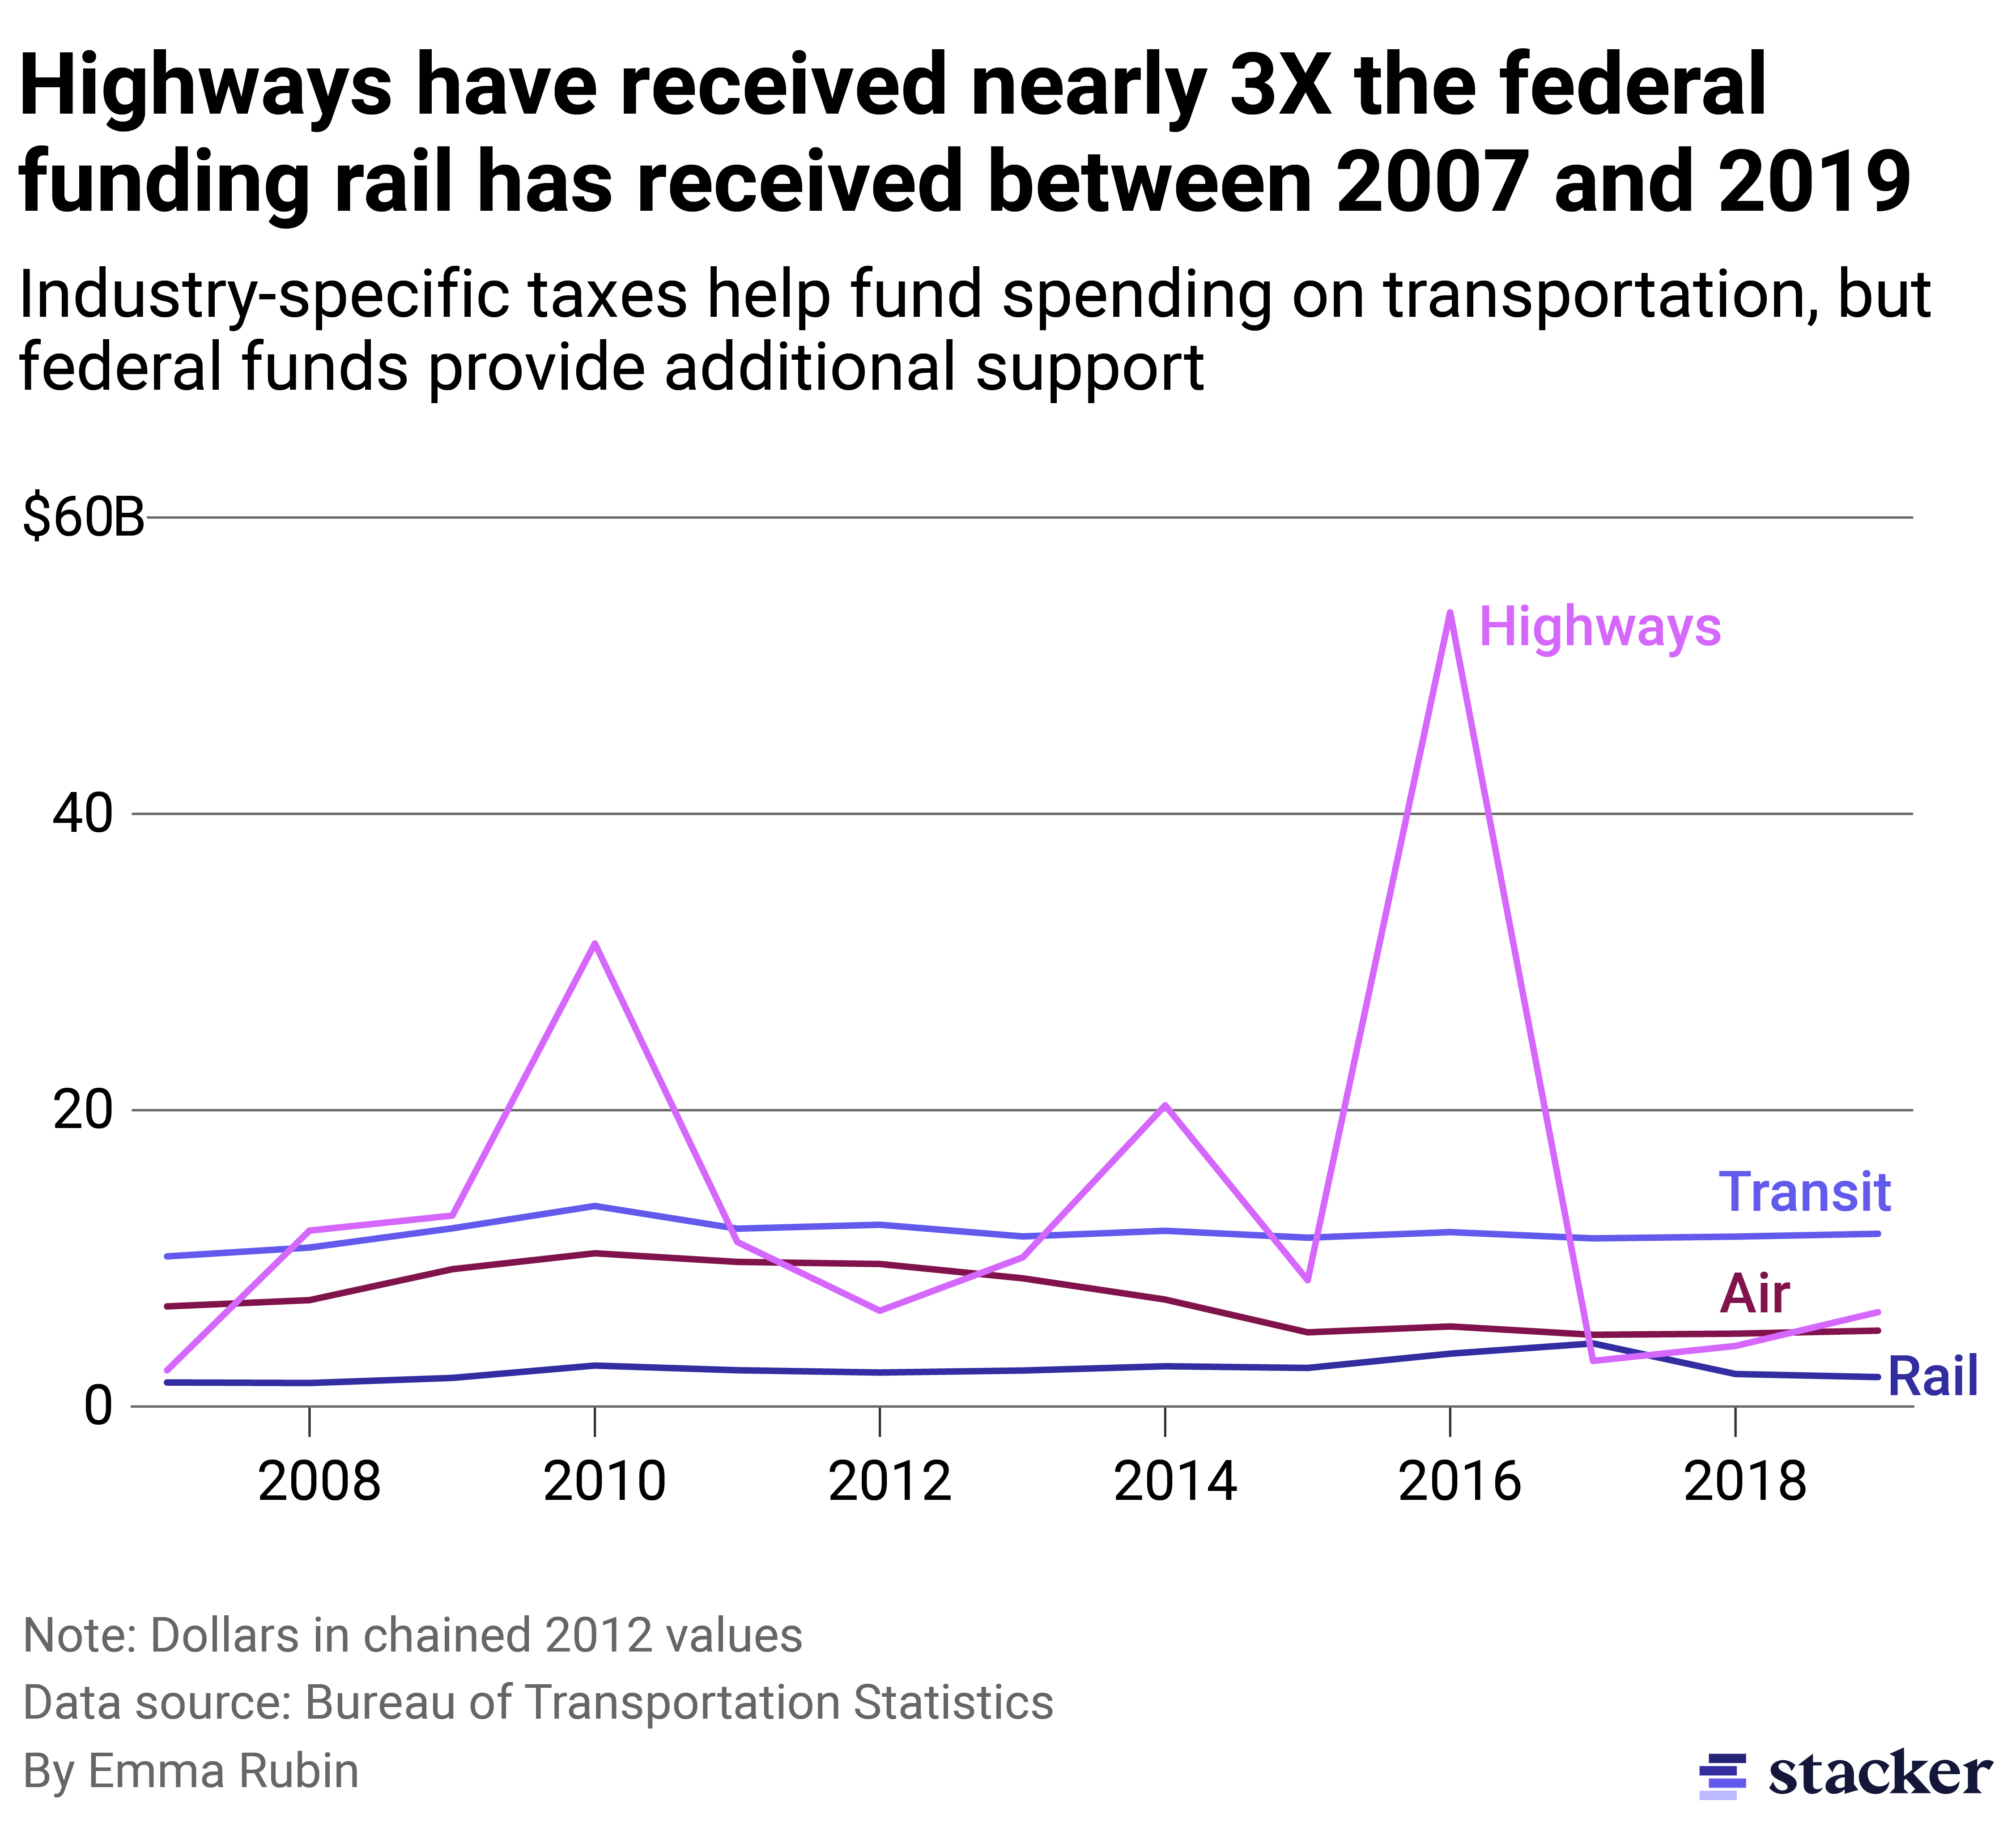 Multiline chart showing spending on rail vs. air and highway